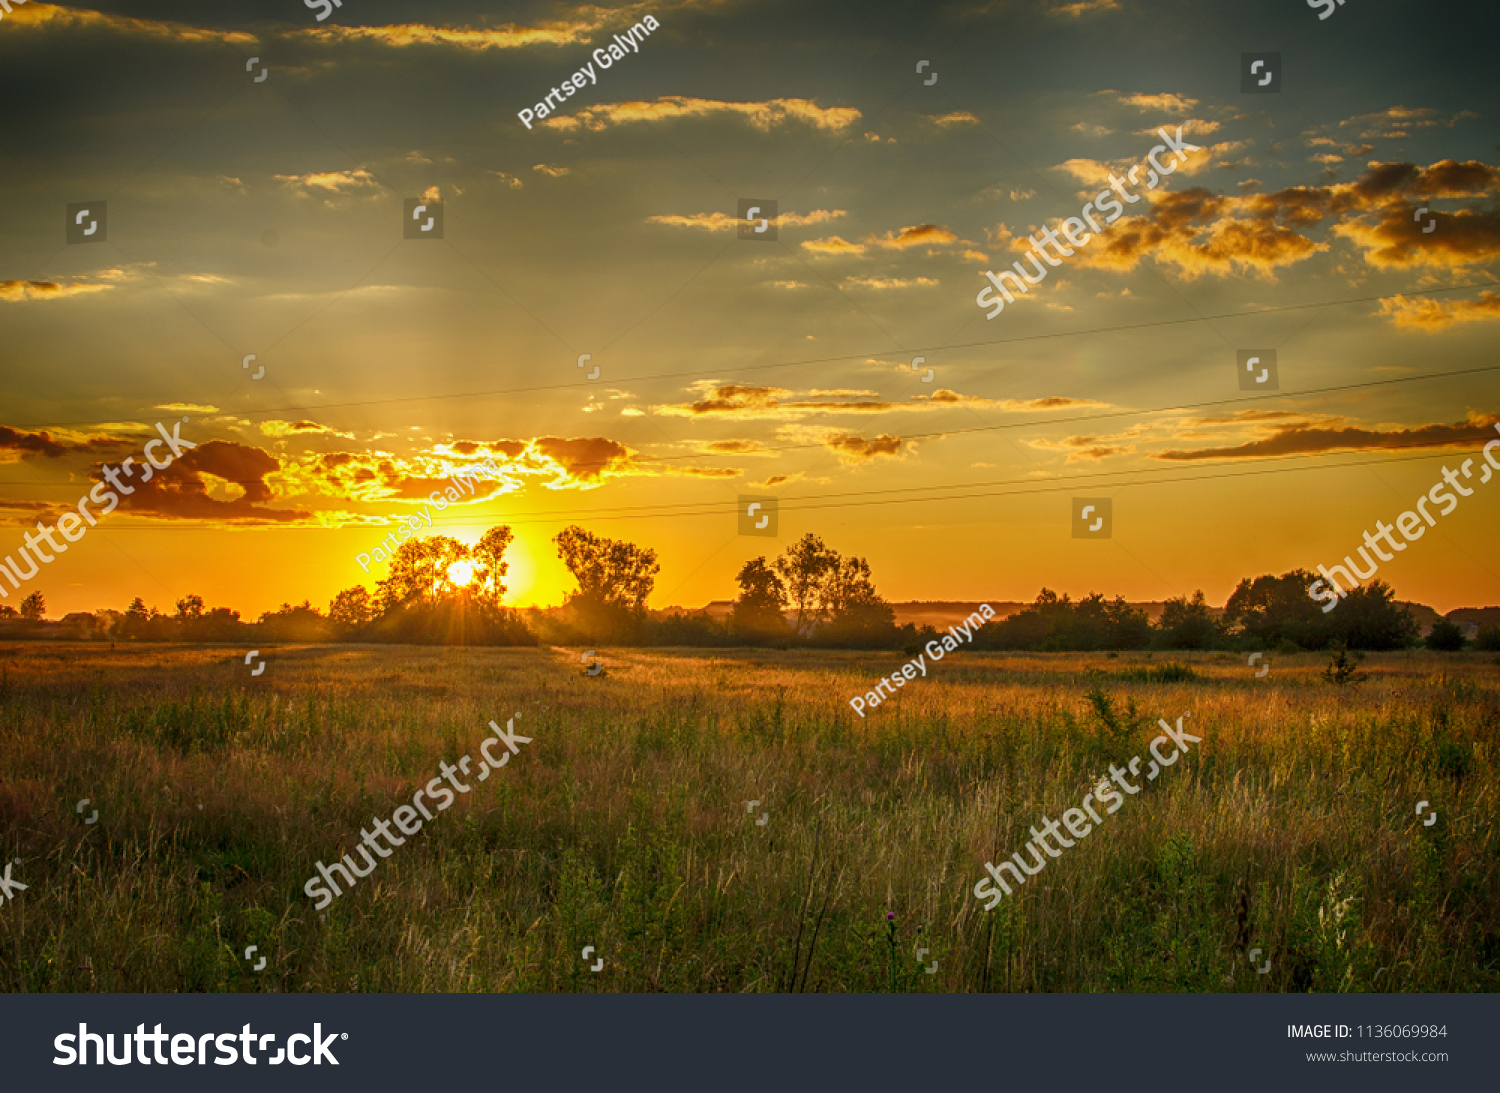 The sky and sunset with the field on which the grass grows #1136069984